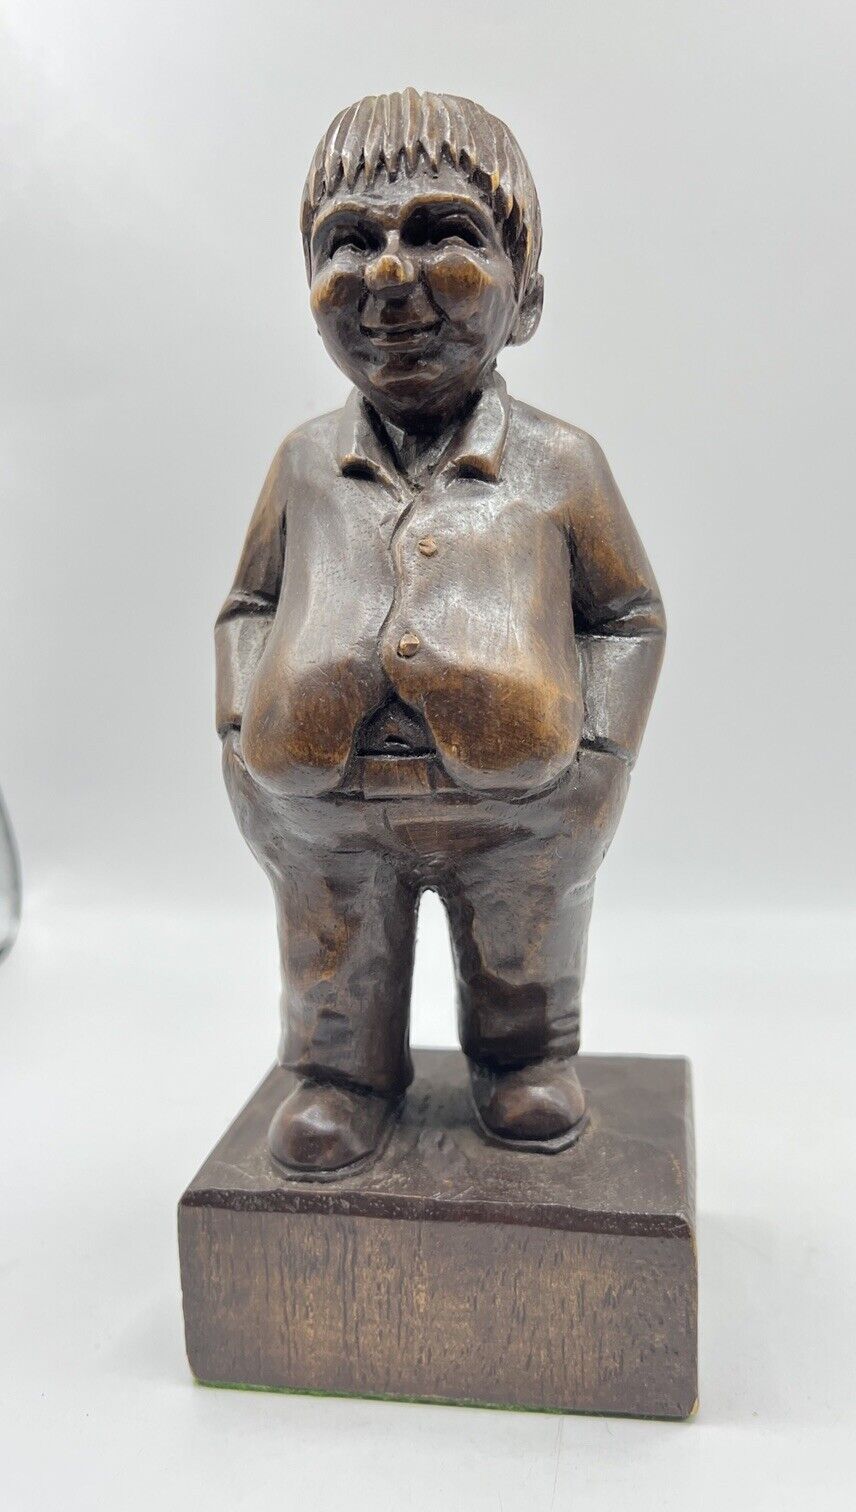 Hand Carved Wooden Statue/Figurine of Fat Man on Base  Signed Brad ‘77